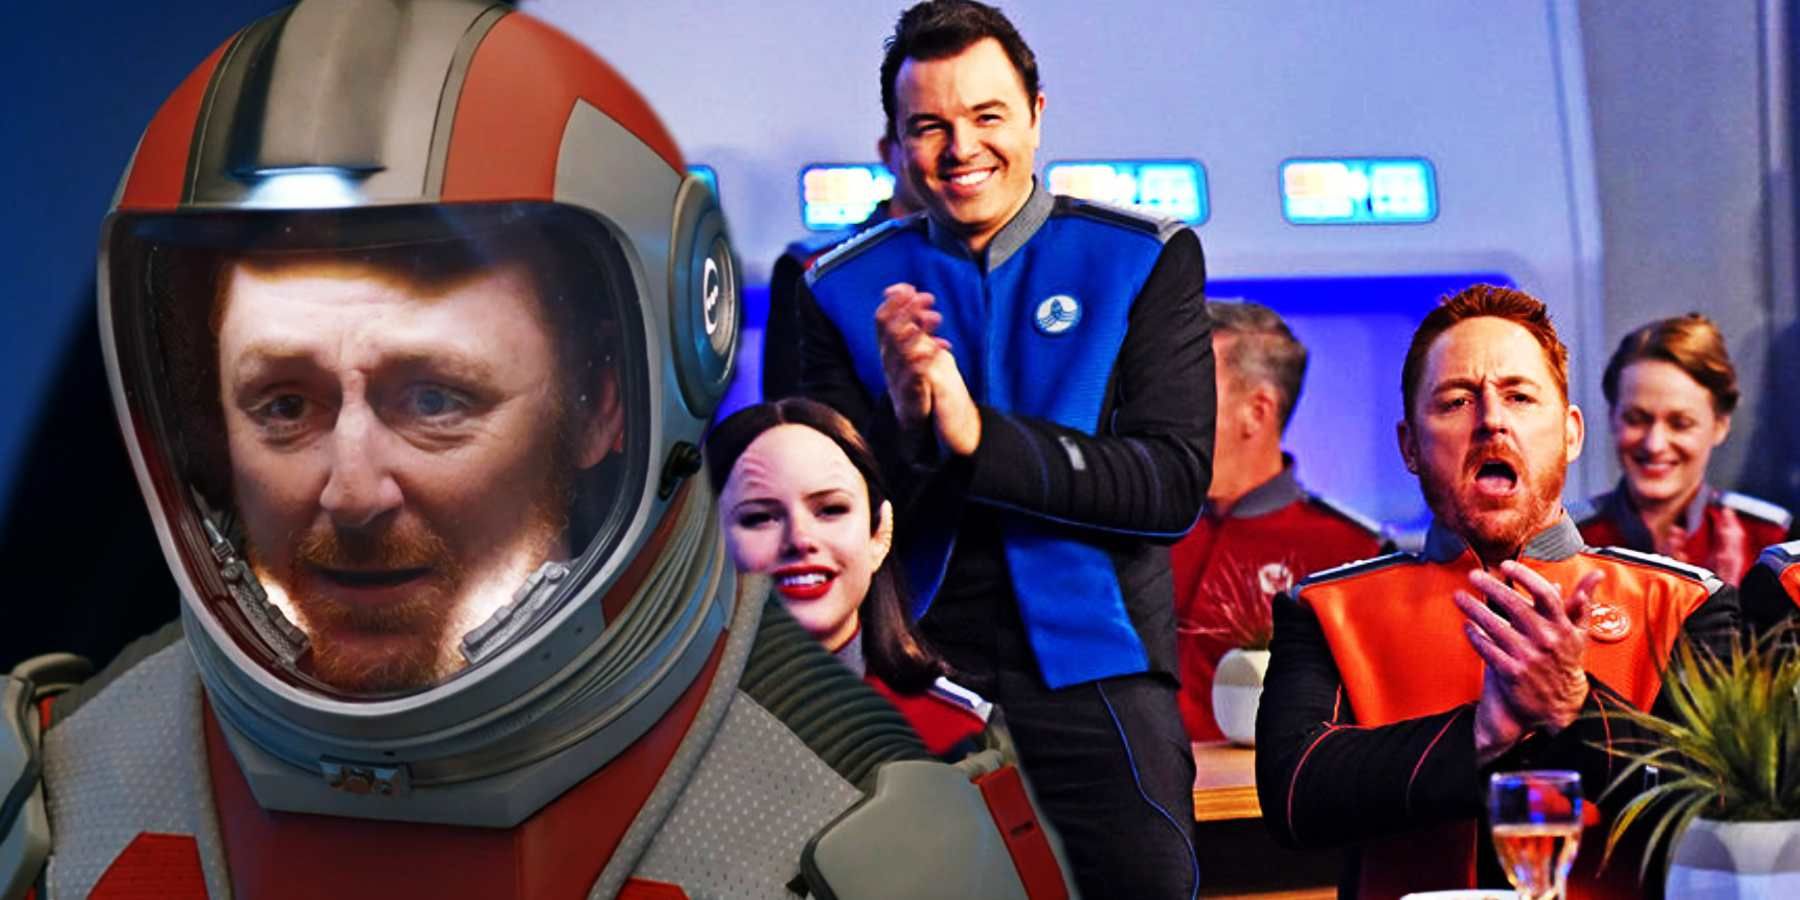 NASA references the Orville giving hope for season 4